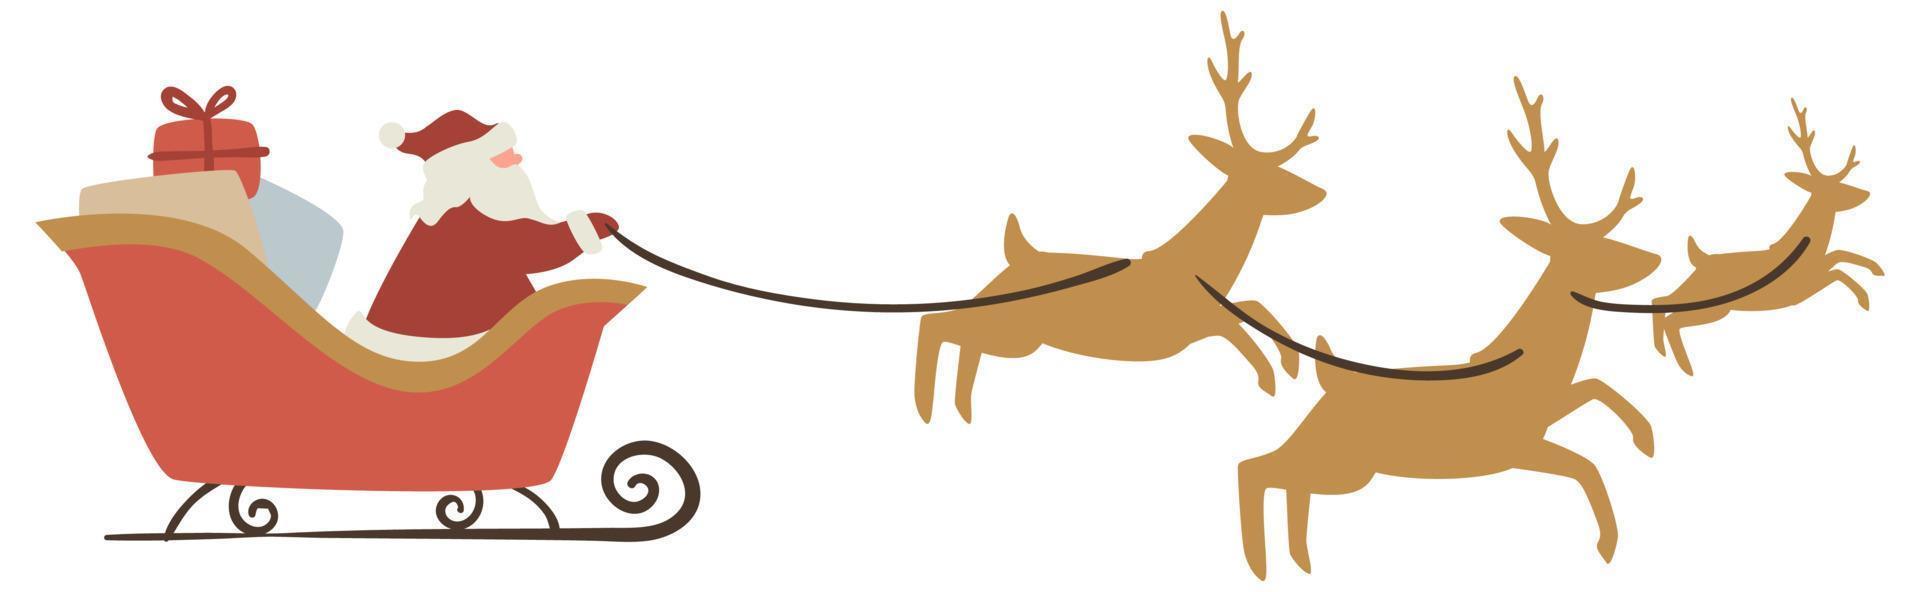 Santa Claus with boxes and presents riding deers vector